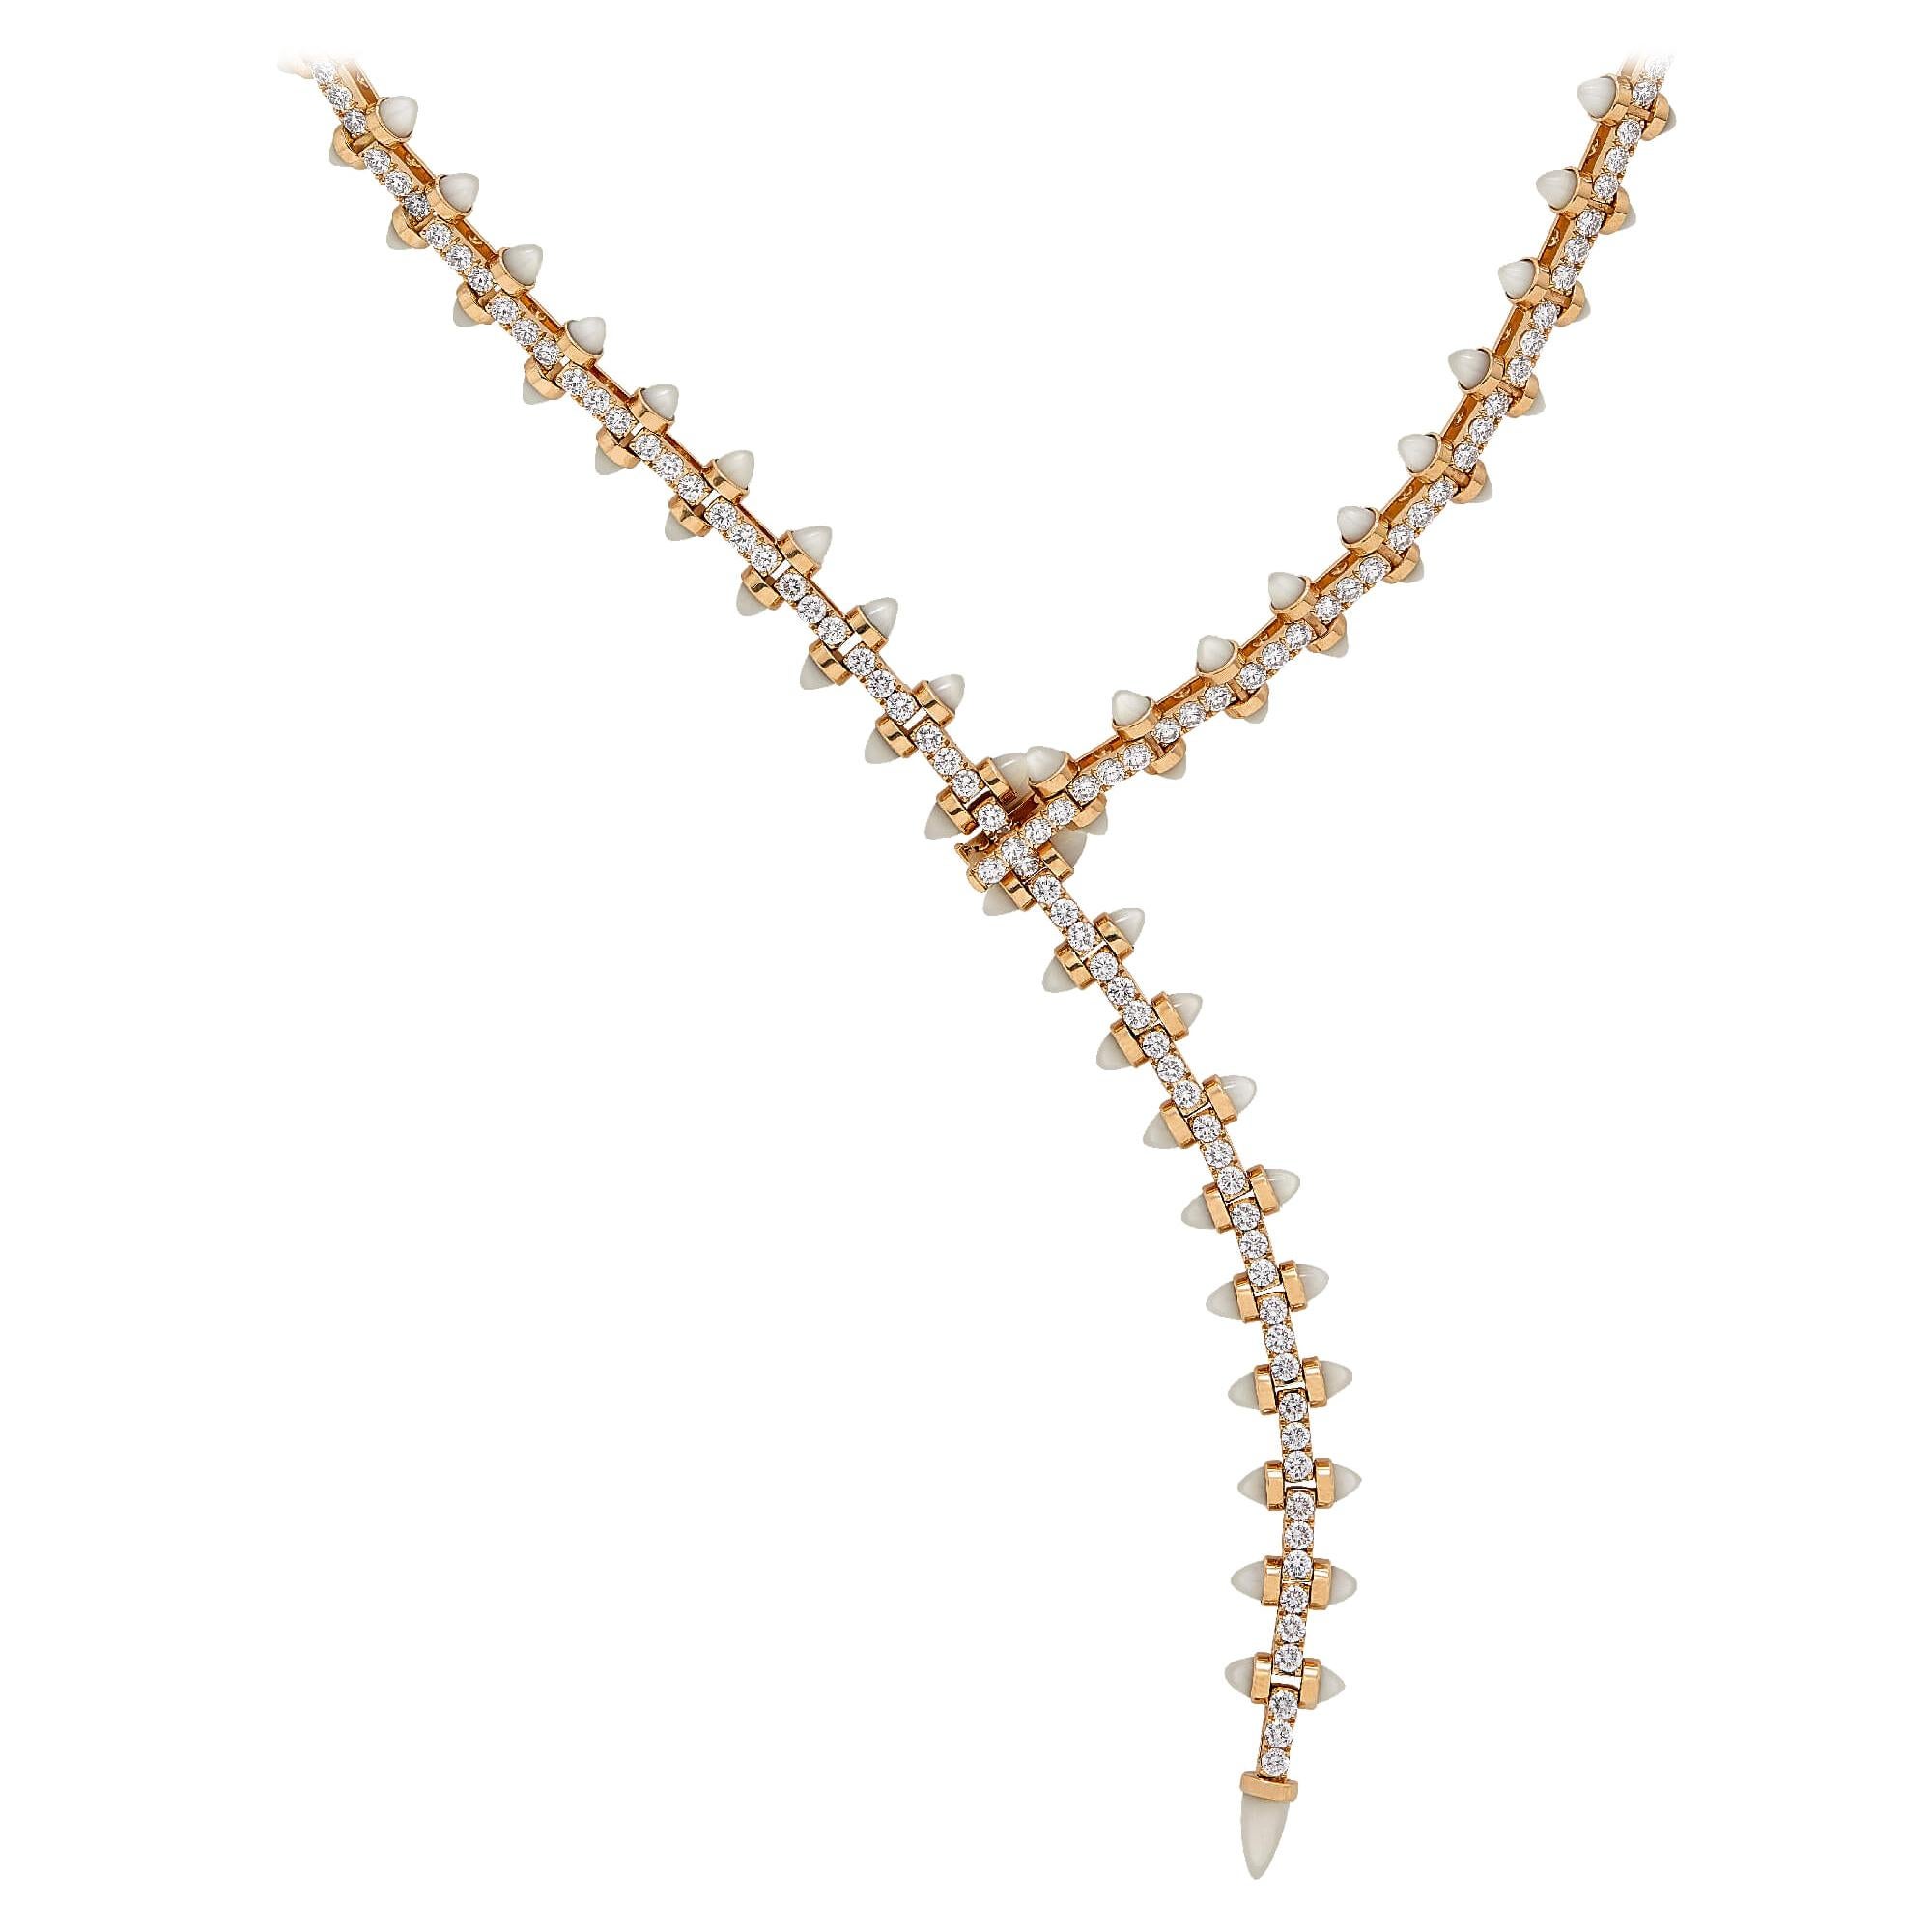 Stephen Webster Russian Roulette Mother of Pearl and Diamond Magazine Necklace